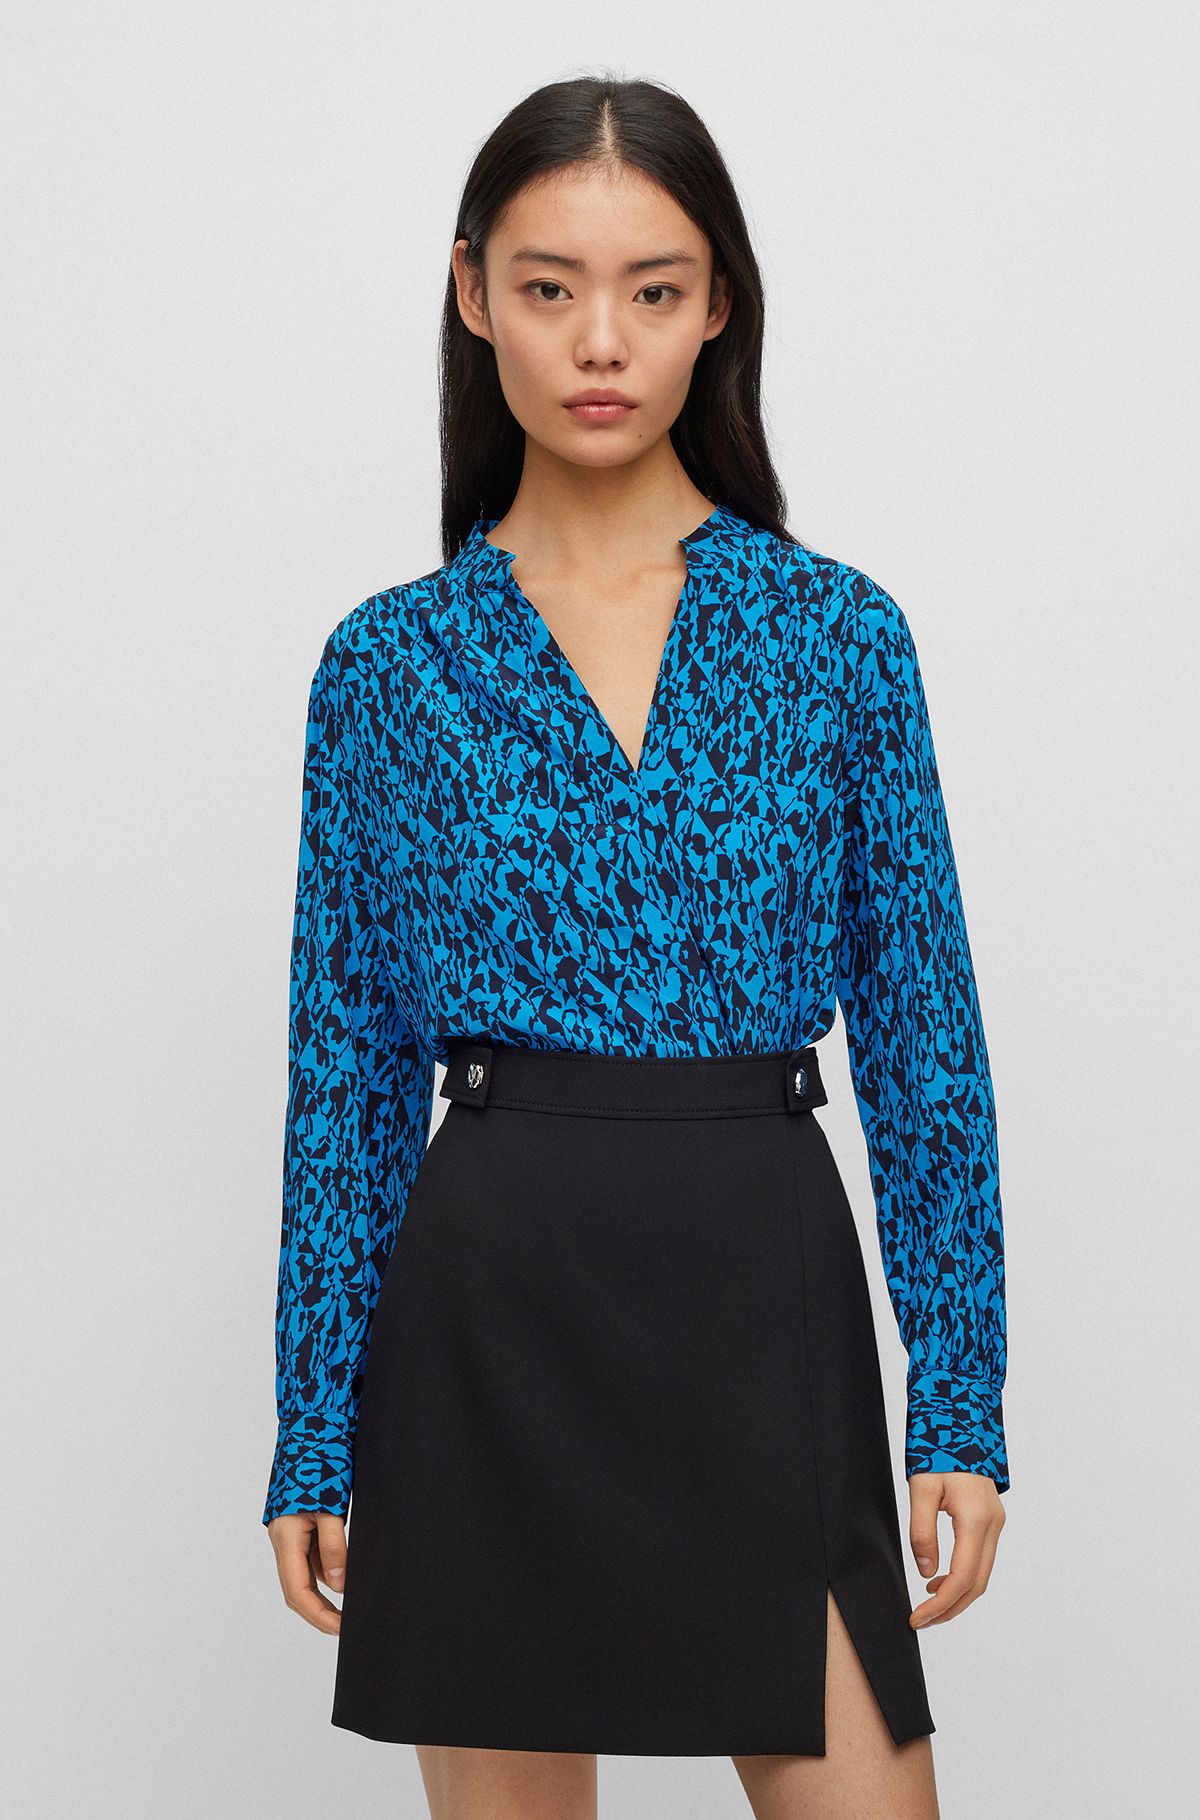 Regular-fit blouse in silk with seasonal print, Patterned